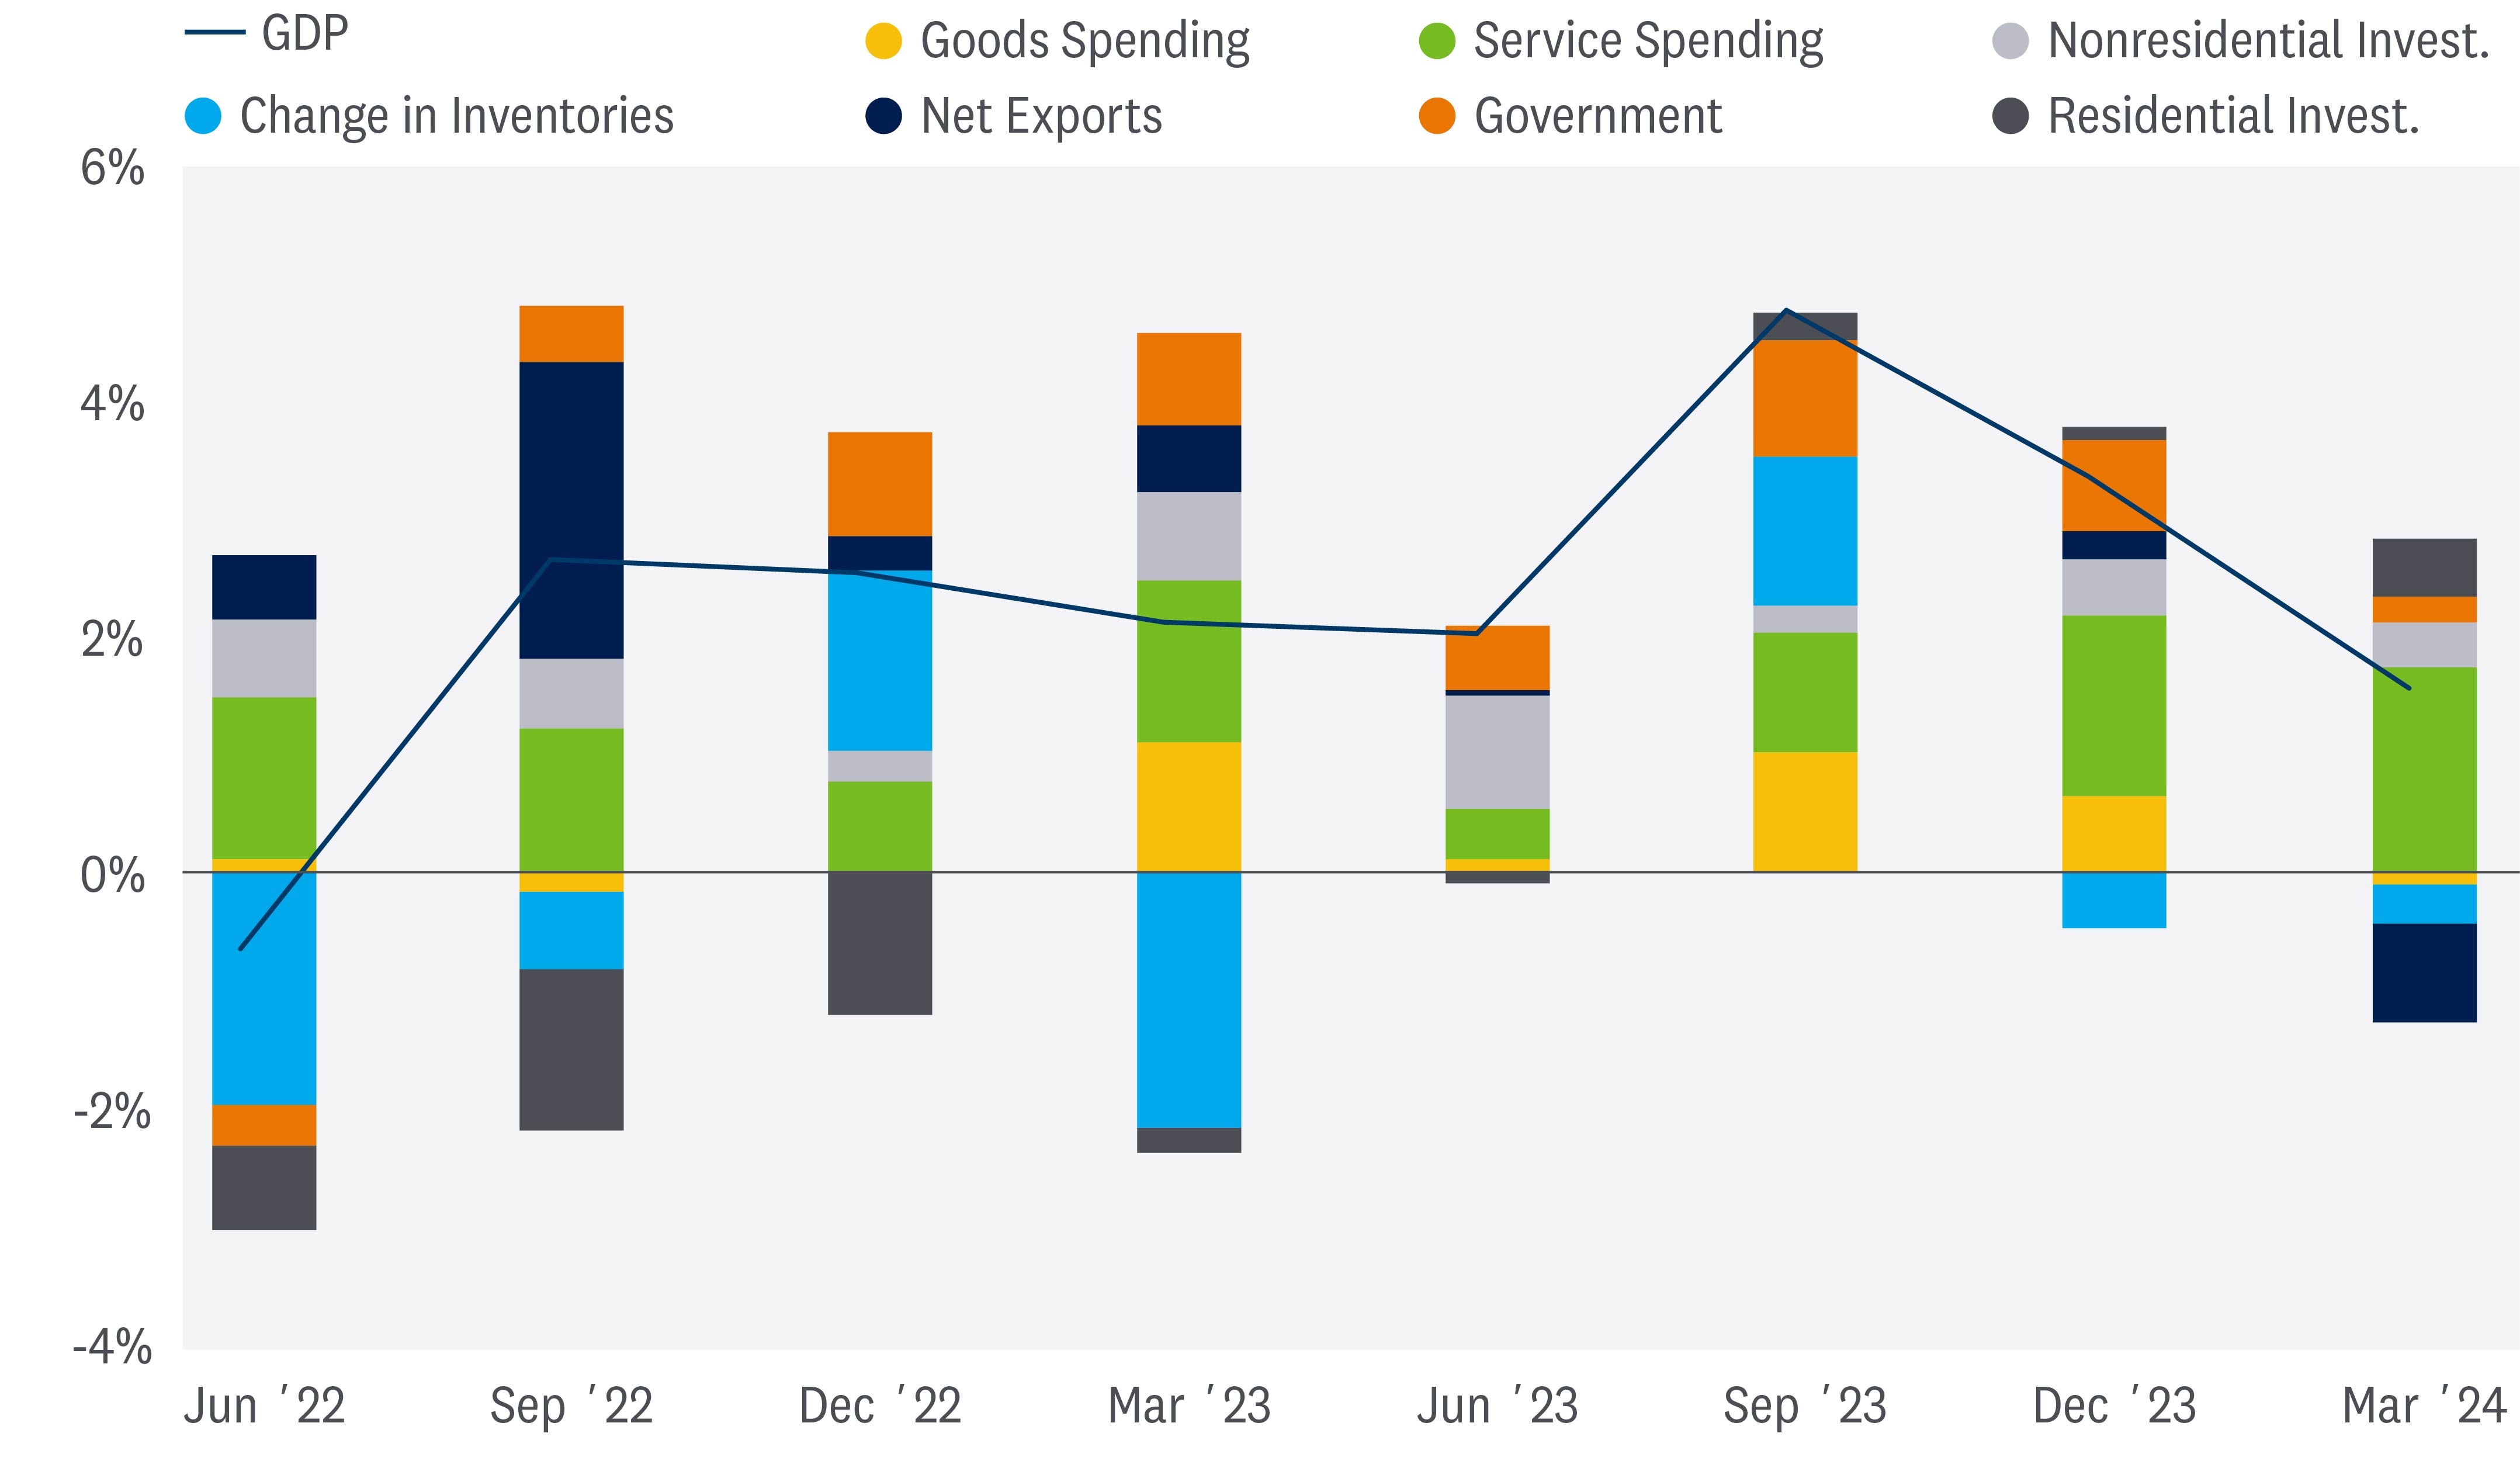 Bar graph of U.S. GDP growth from June 2022 to March 2024. The graph depicts change in inventories, goods spending, net exports, service spending, government, nonresidential investments, and residential investments. 